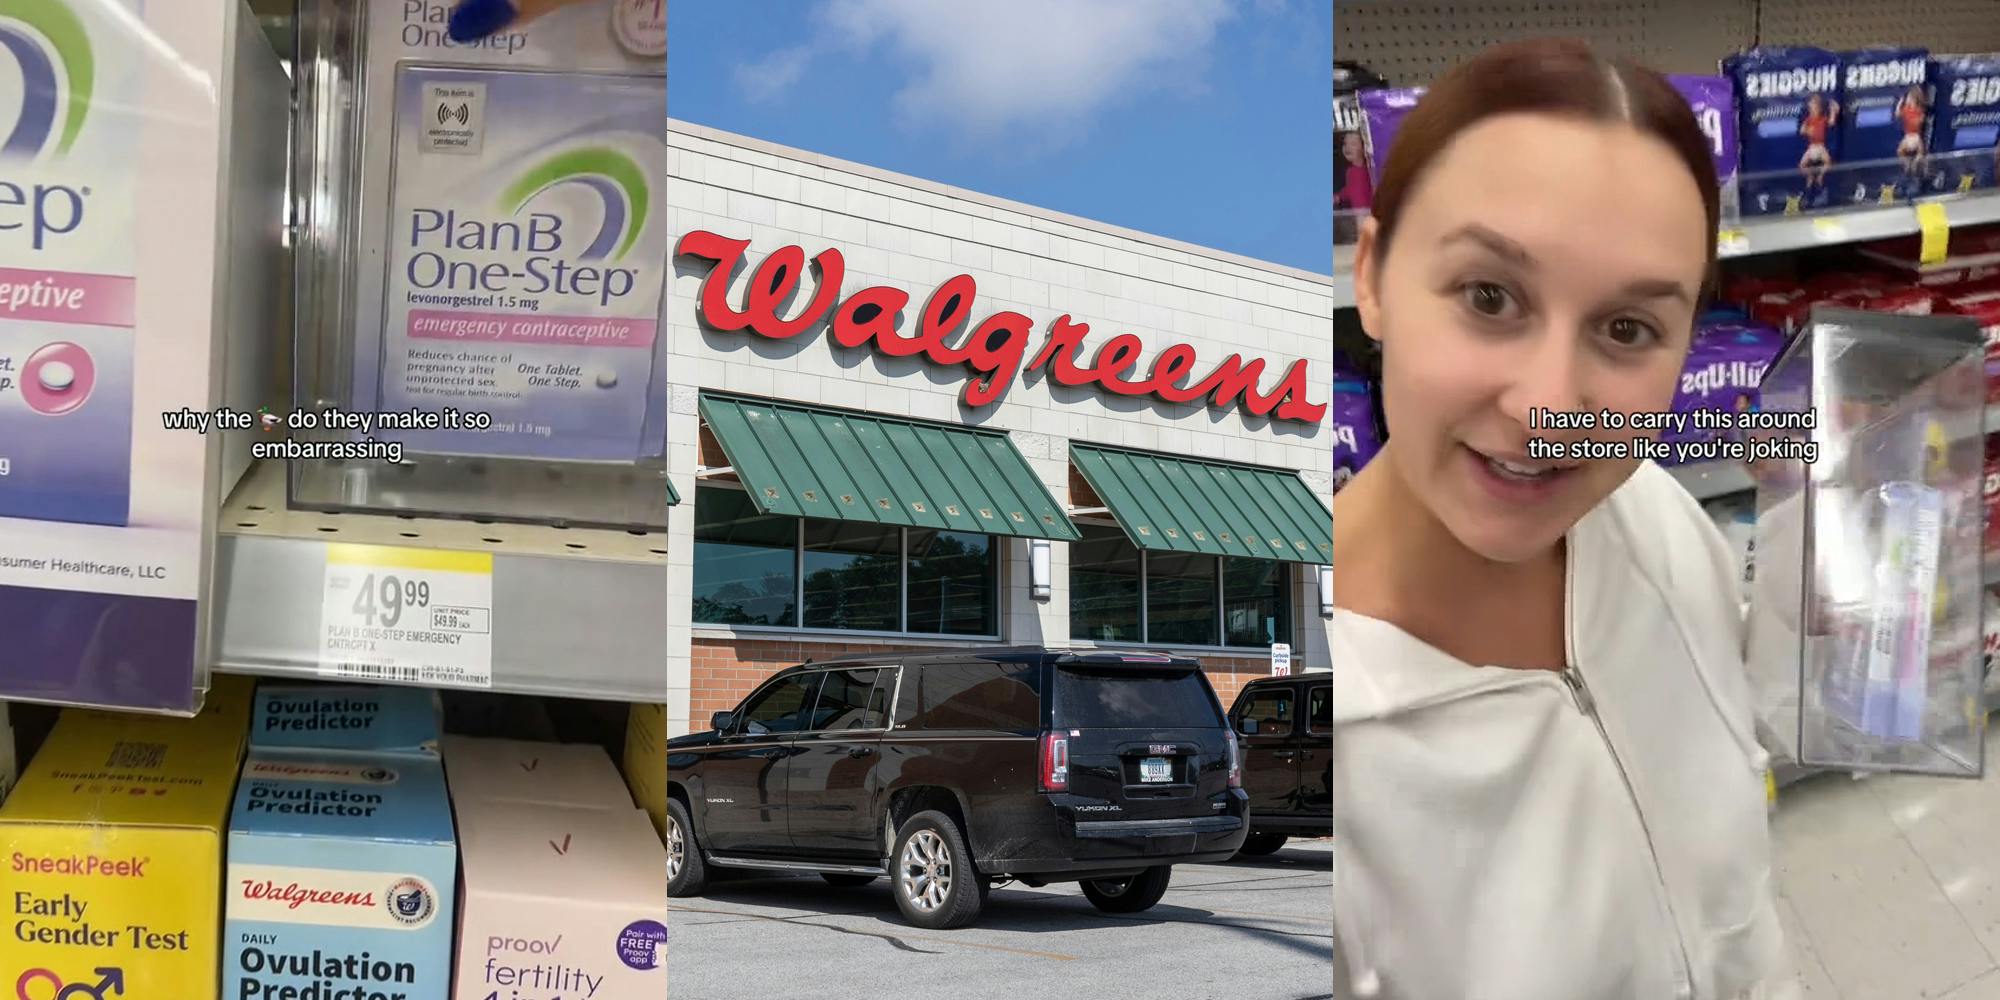 Plan B in case at Walgreens with caption "why the (banana emoji) do they make it so embarrassing..." (l) Walgreens building with sign (c) Walgreens customer speaking holding Plan B in case with caption "I have to carry this around the store like you're joking" (r)